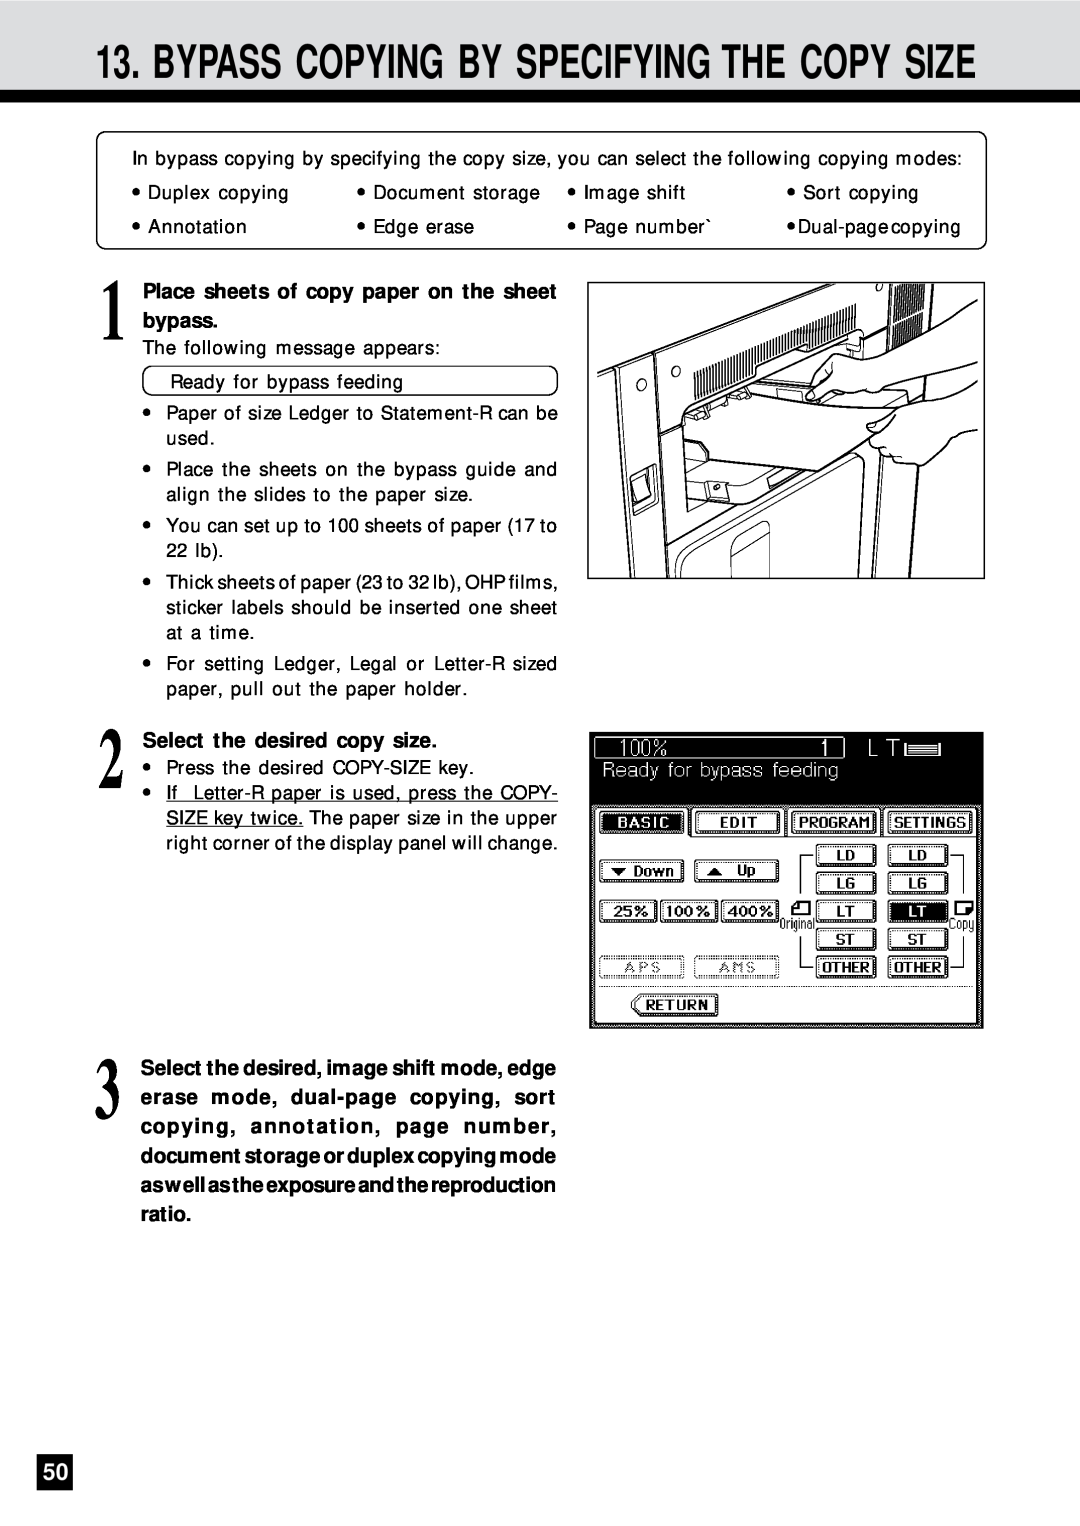 Sharp AR-650 operation manual Bypass Copying By Specifying The Copy Size, Place sheets of copy paper on the sheet bypass 